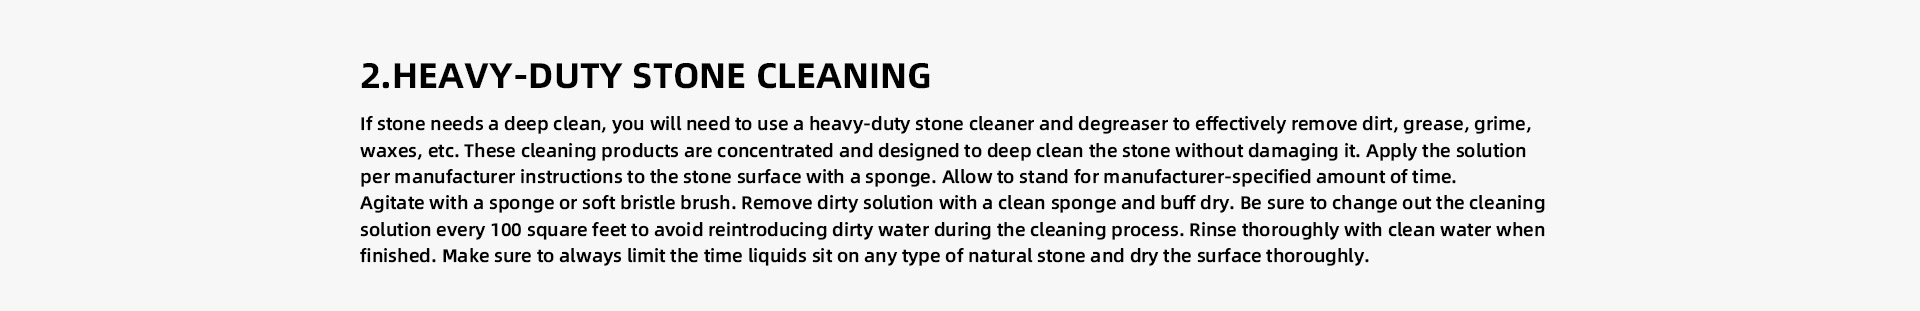 HEAVY-DUTY STONE CLEANING If stone needs a deep clean, you will need to use a heavy-duty stone cleaner and degreaser to effectively remove dirt, grease, grime, waxes, etc. These cleaning products are concentrated and designed to deep clean the stone without damaging it. Apply the solution per manufacturer instructions to the stone surface with a sponge. Allow to stand for manufacturer-specified amount of time.   